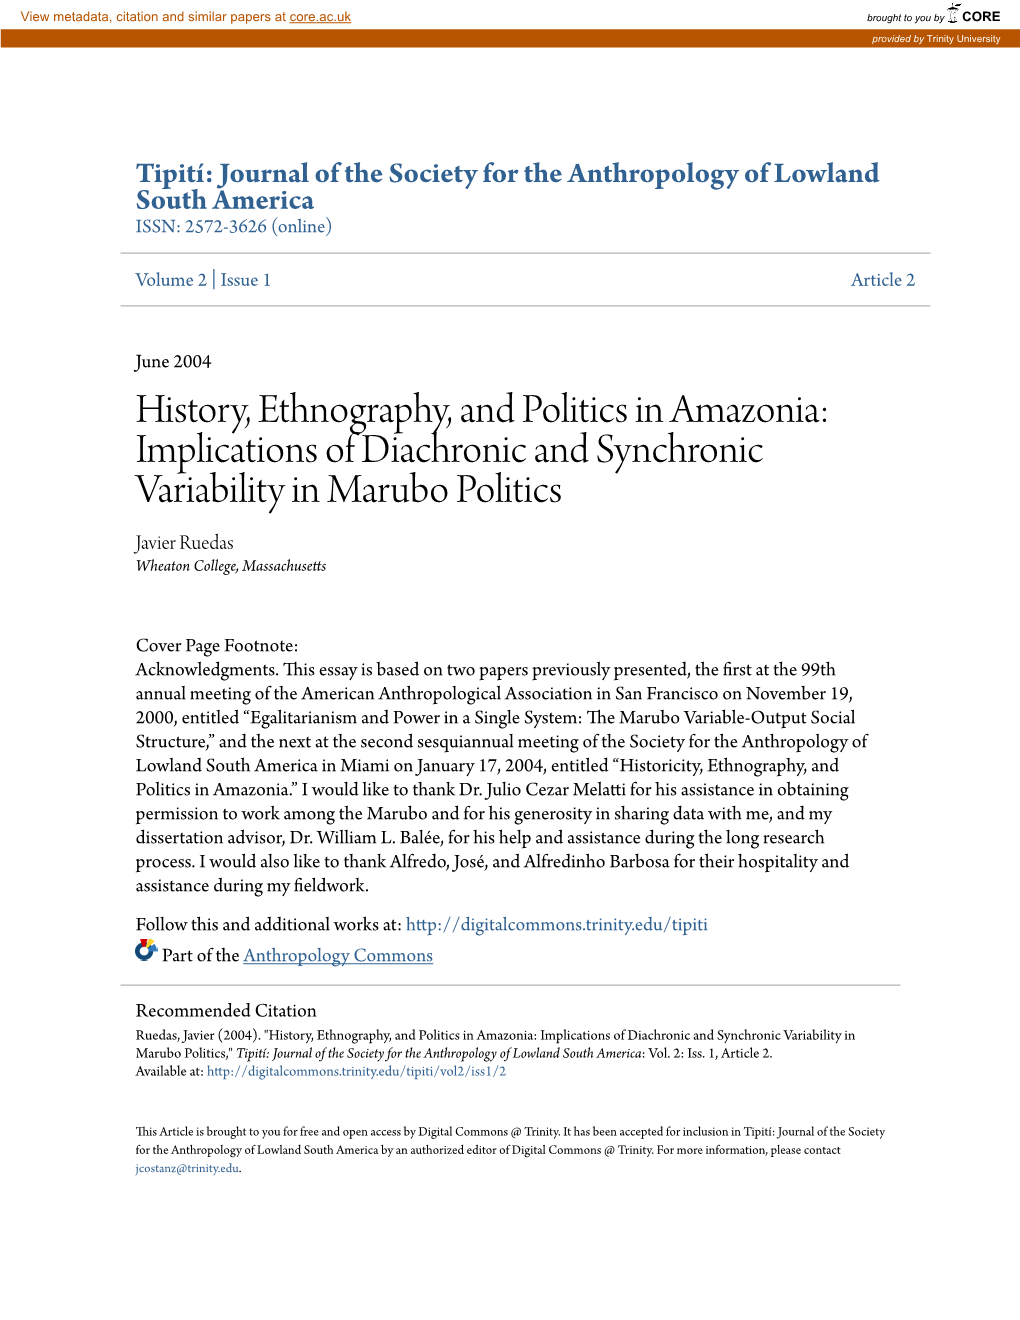 History, Ethnography, and Politics in Amazonia: Implications of Diachronic and Synchronic Variability in Marubo Politics Javier Ruedas Wheaton College, Massachusetts